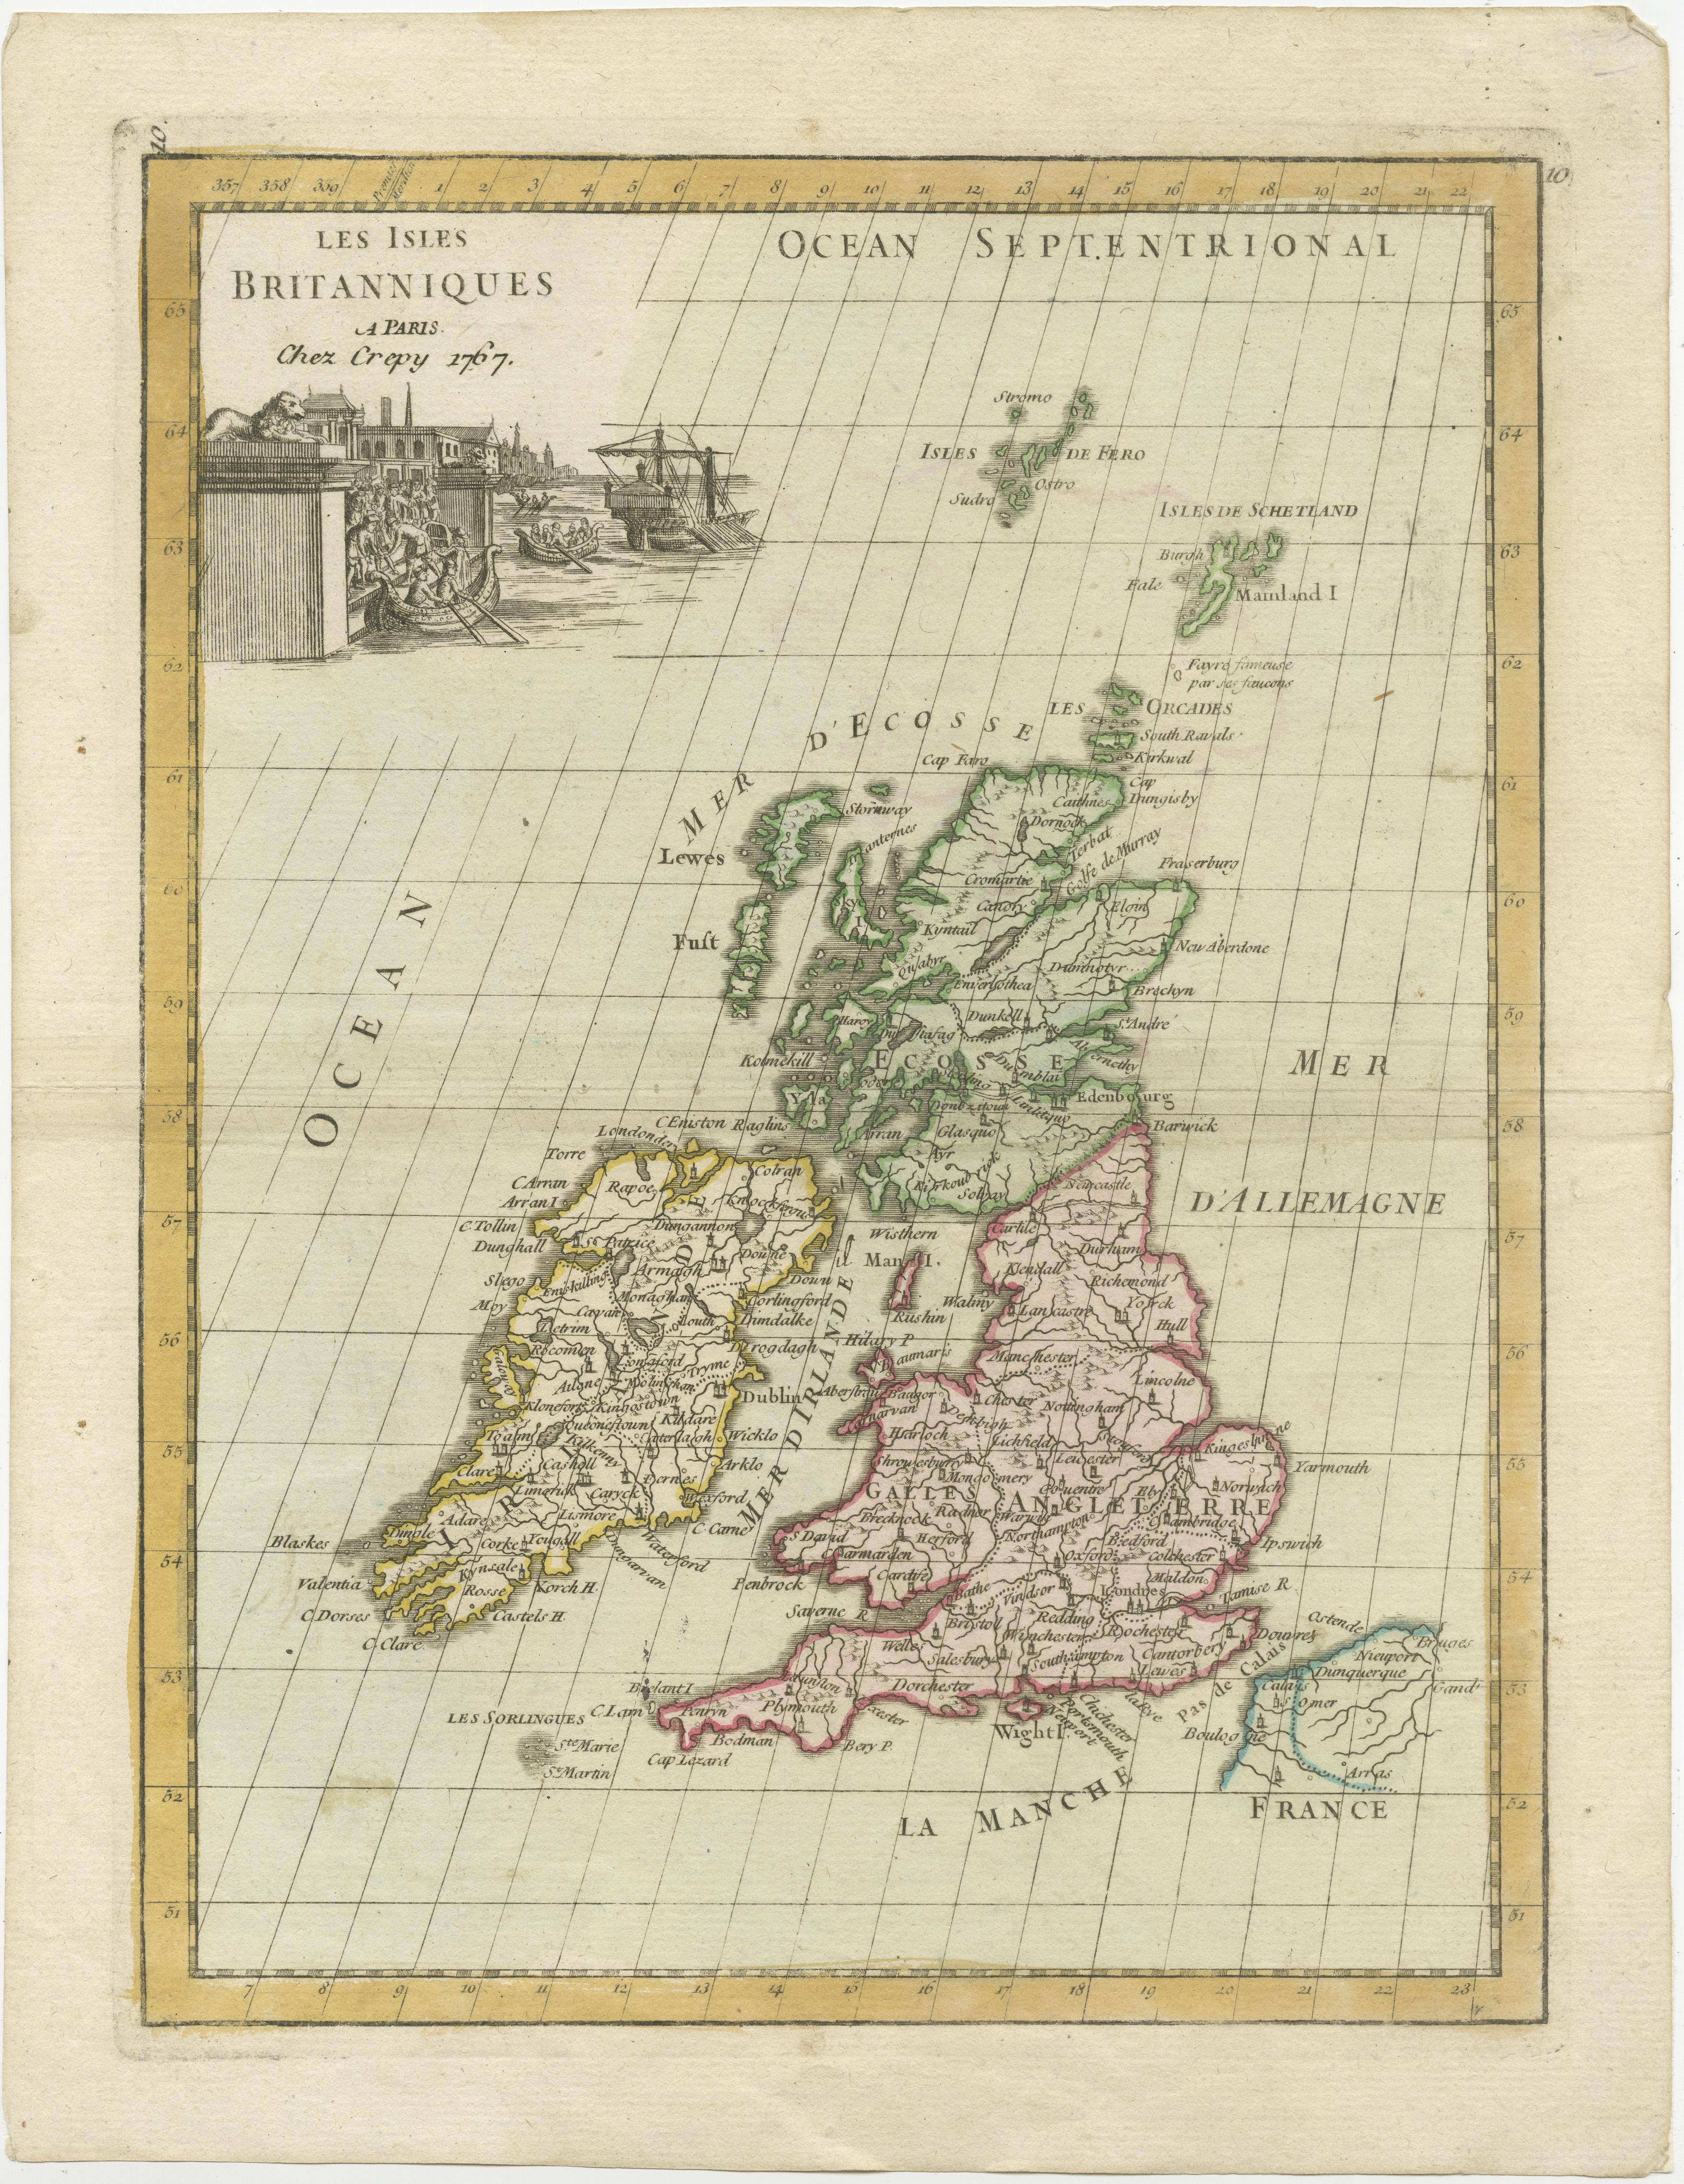 Antique map titled 'Les Isles Britanniques'. Original antique map of the British Isles, with original/contemporary hand coloring. Published by Crepe, circa 1767.